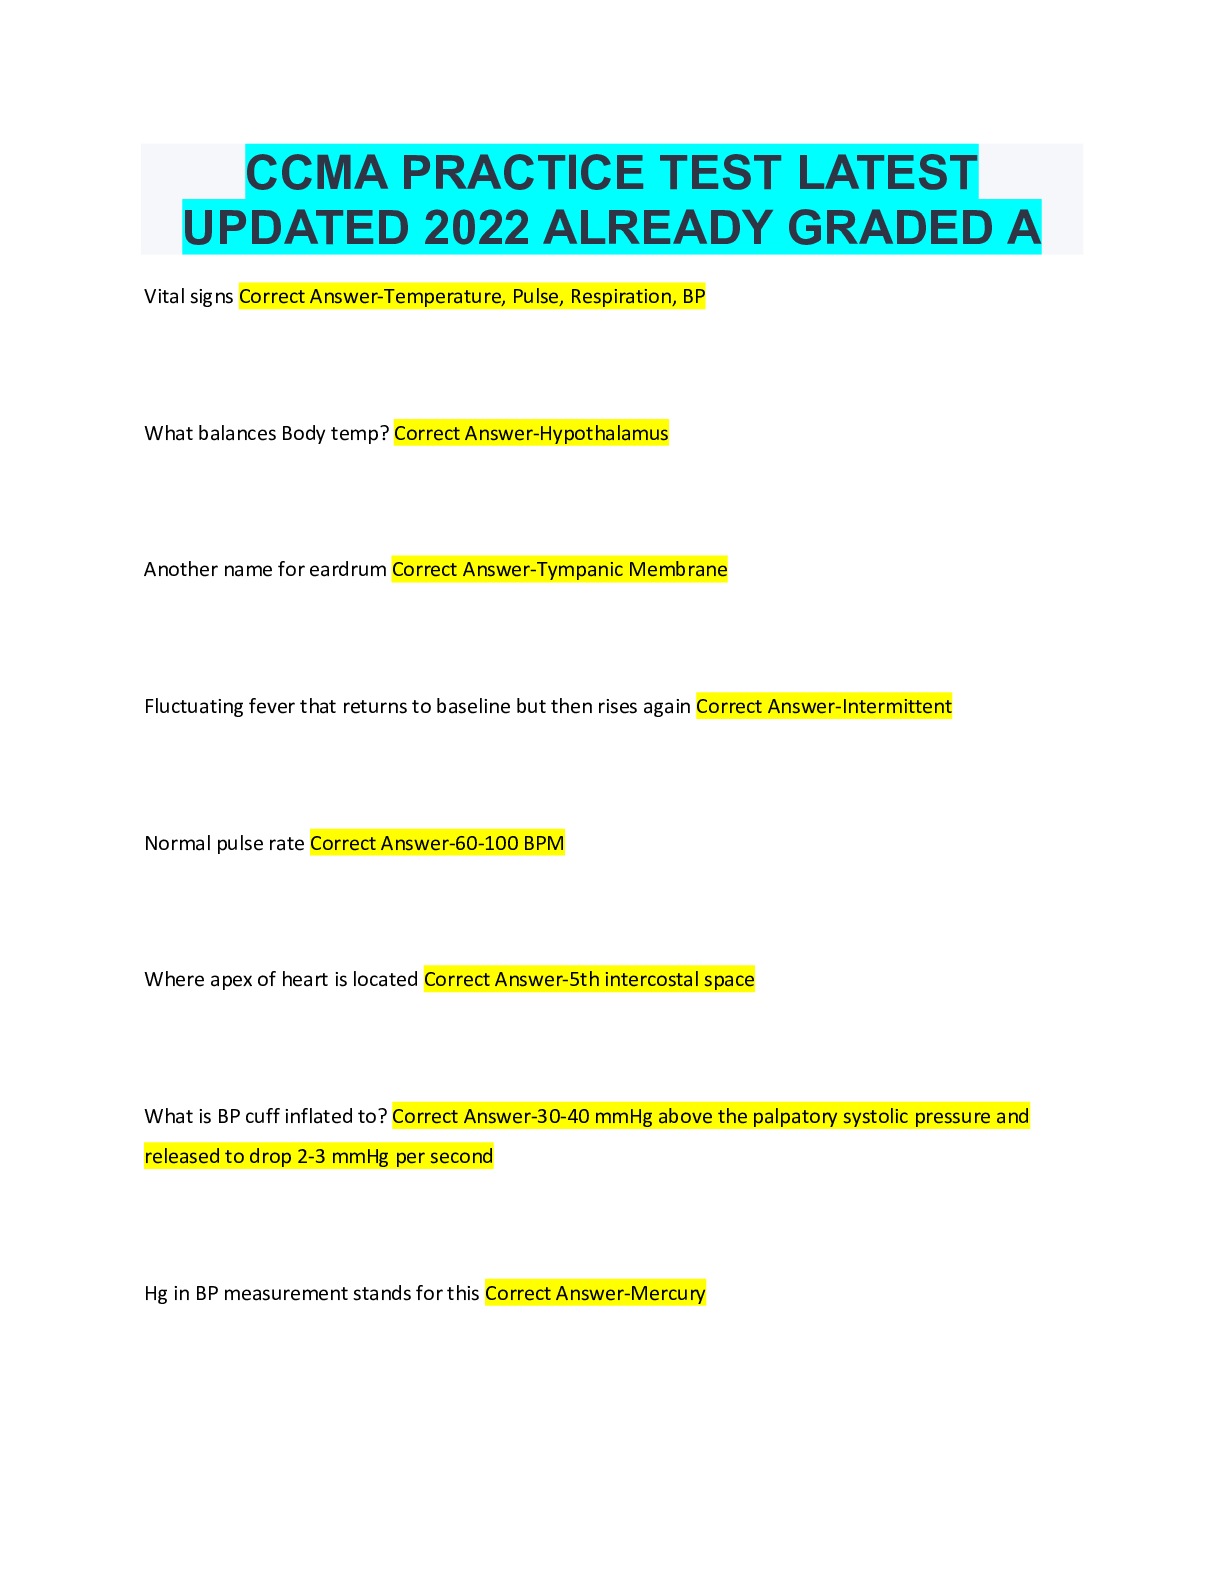 CCMA PRACTICE TEST LATEST UPDATED 2022 ALREADY GRADED Browsegrades